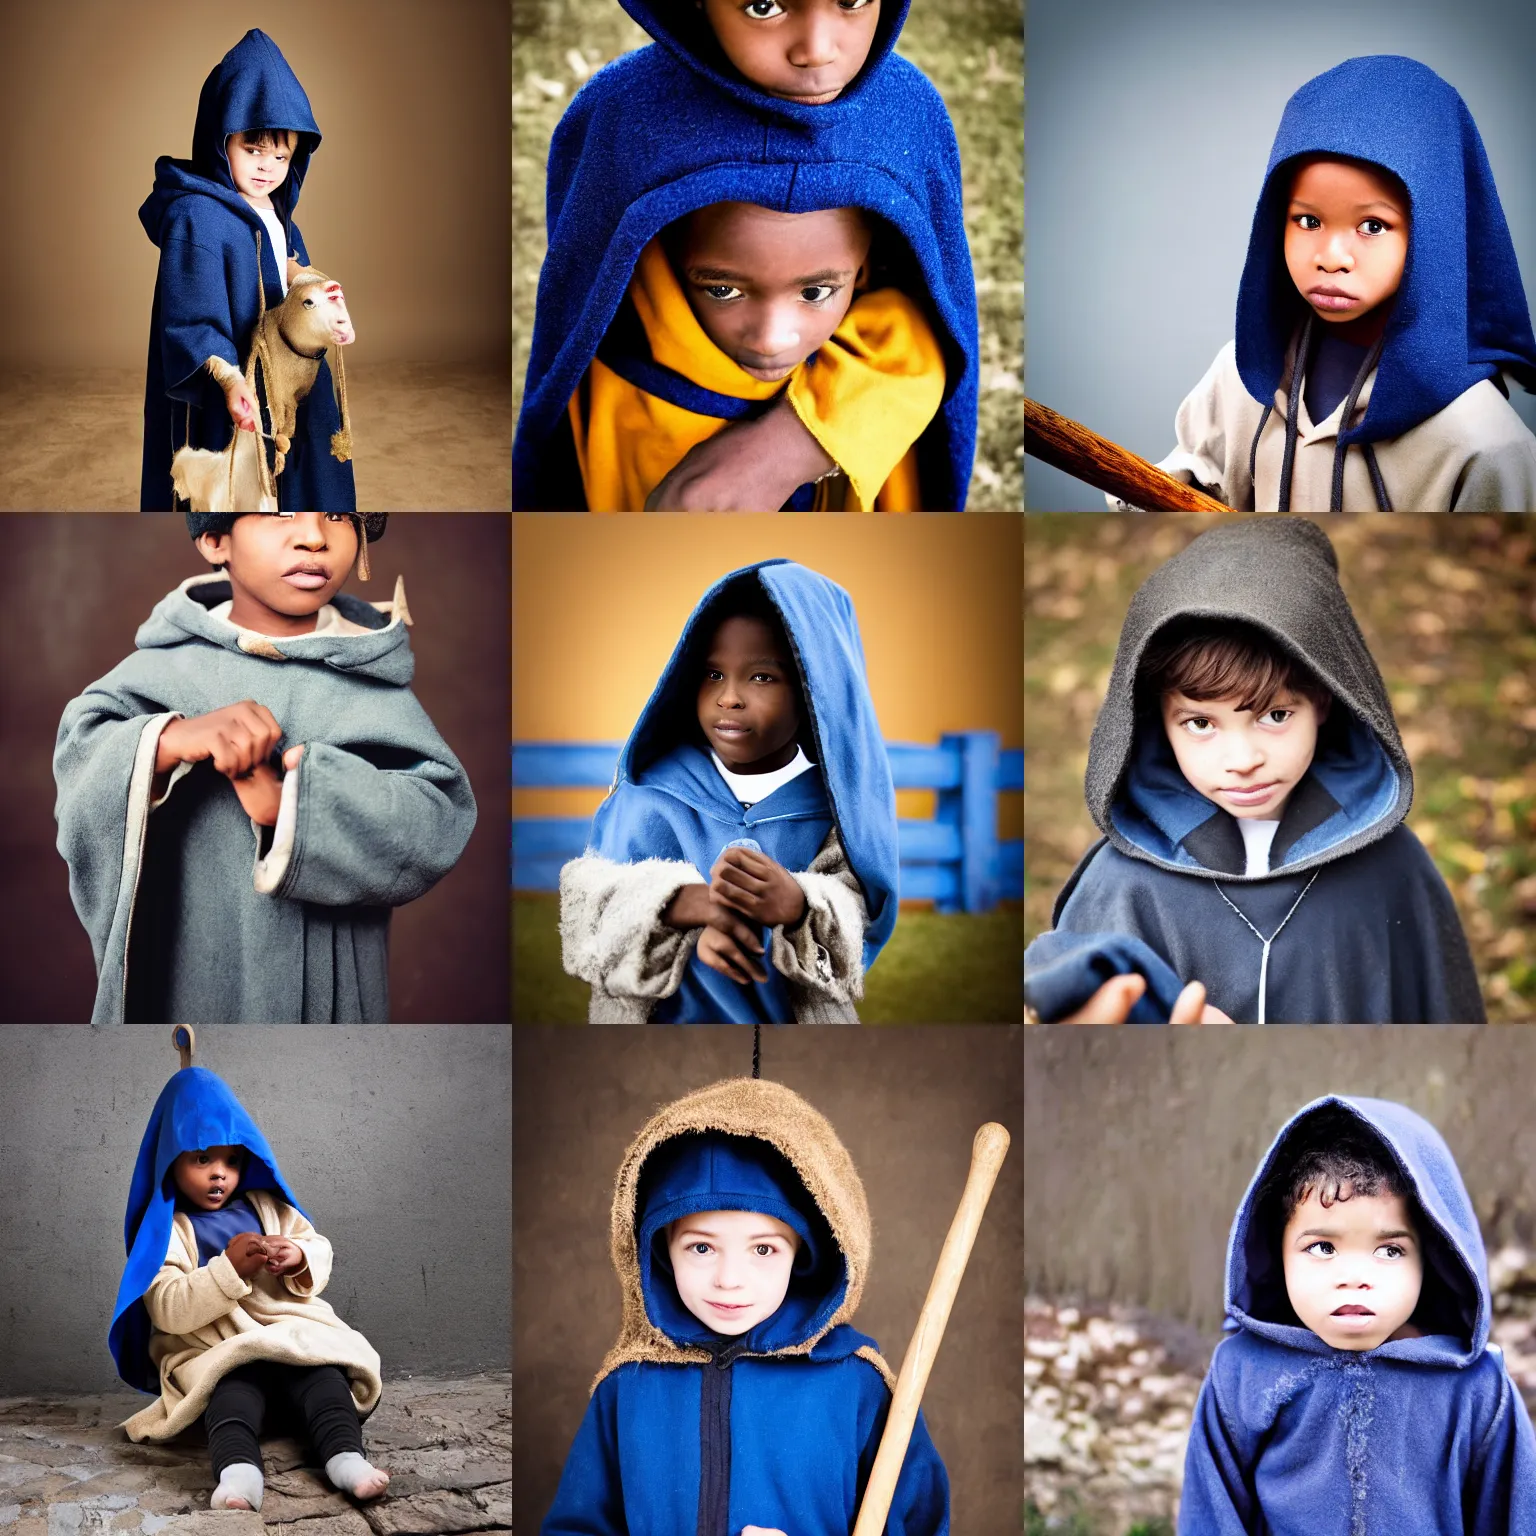 Prompt: black child dressed as shepherd for a nativity play, blue hooded cloak, shepherd's crook, candid photo, indoors, mm, iso, trending